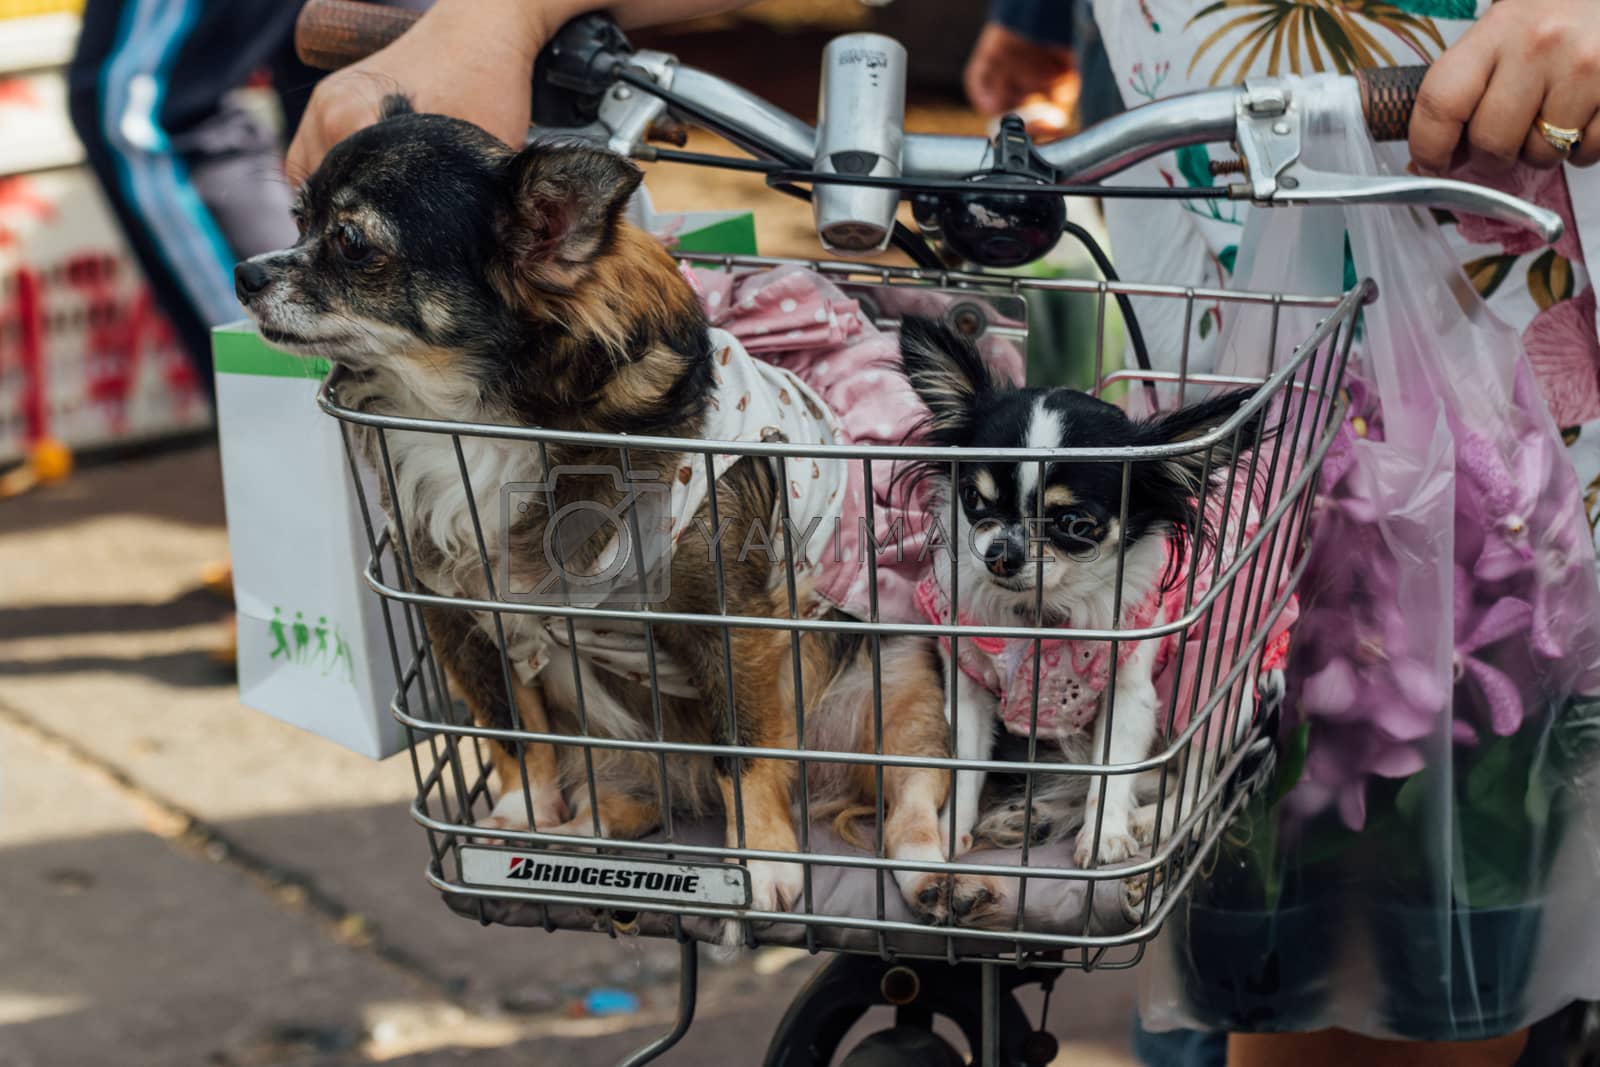 Bangkok, Thailand - December 19, 2015 : Unidentified asian dog owner with a dog feeling happy when owner and  pet (The dog) on shopping cart allowed to entrance for pets expo or exhibit hall